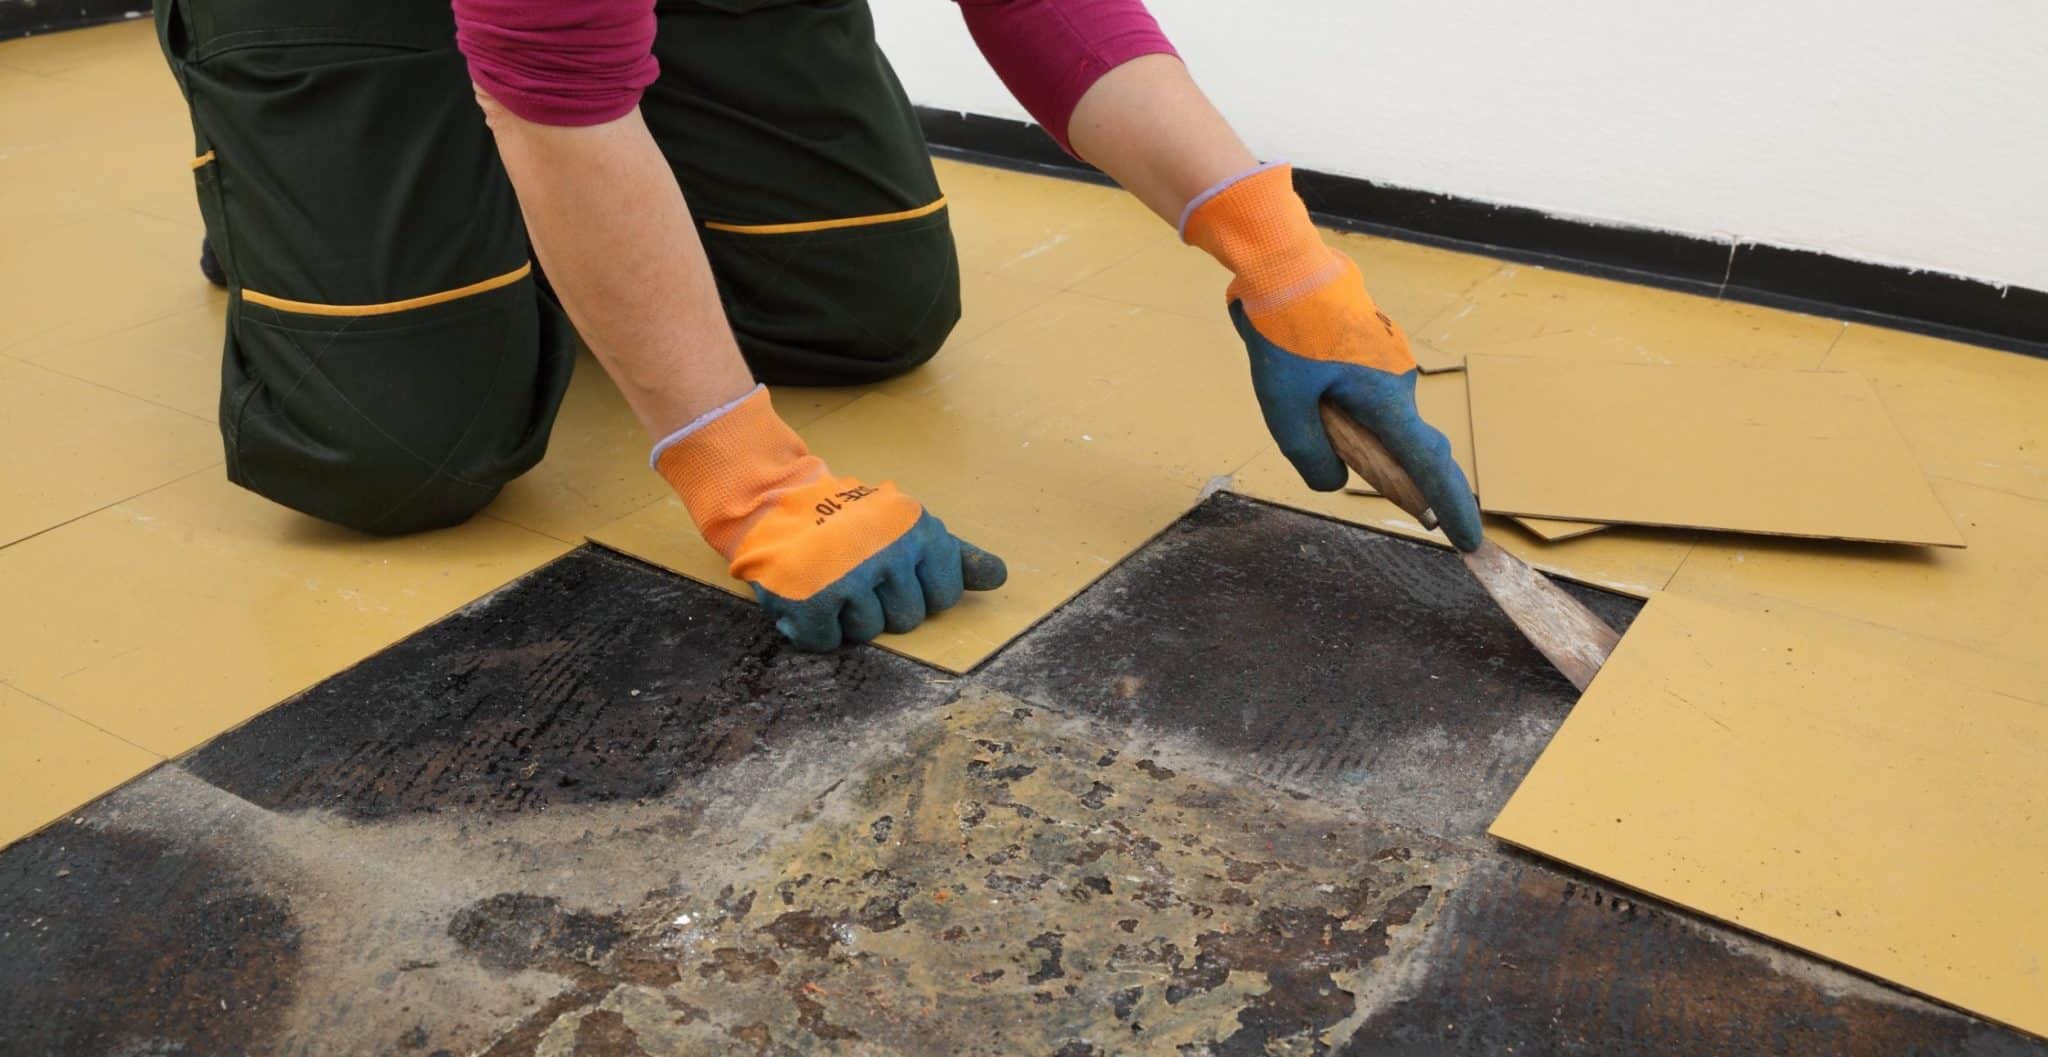 Female worker removing old vinyl tiles from kitchen floor using spatula trowel tool